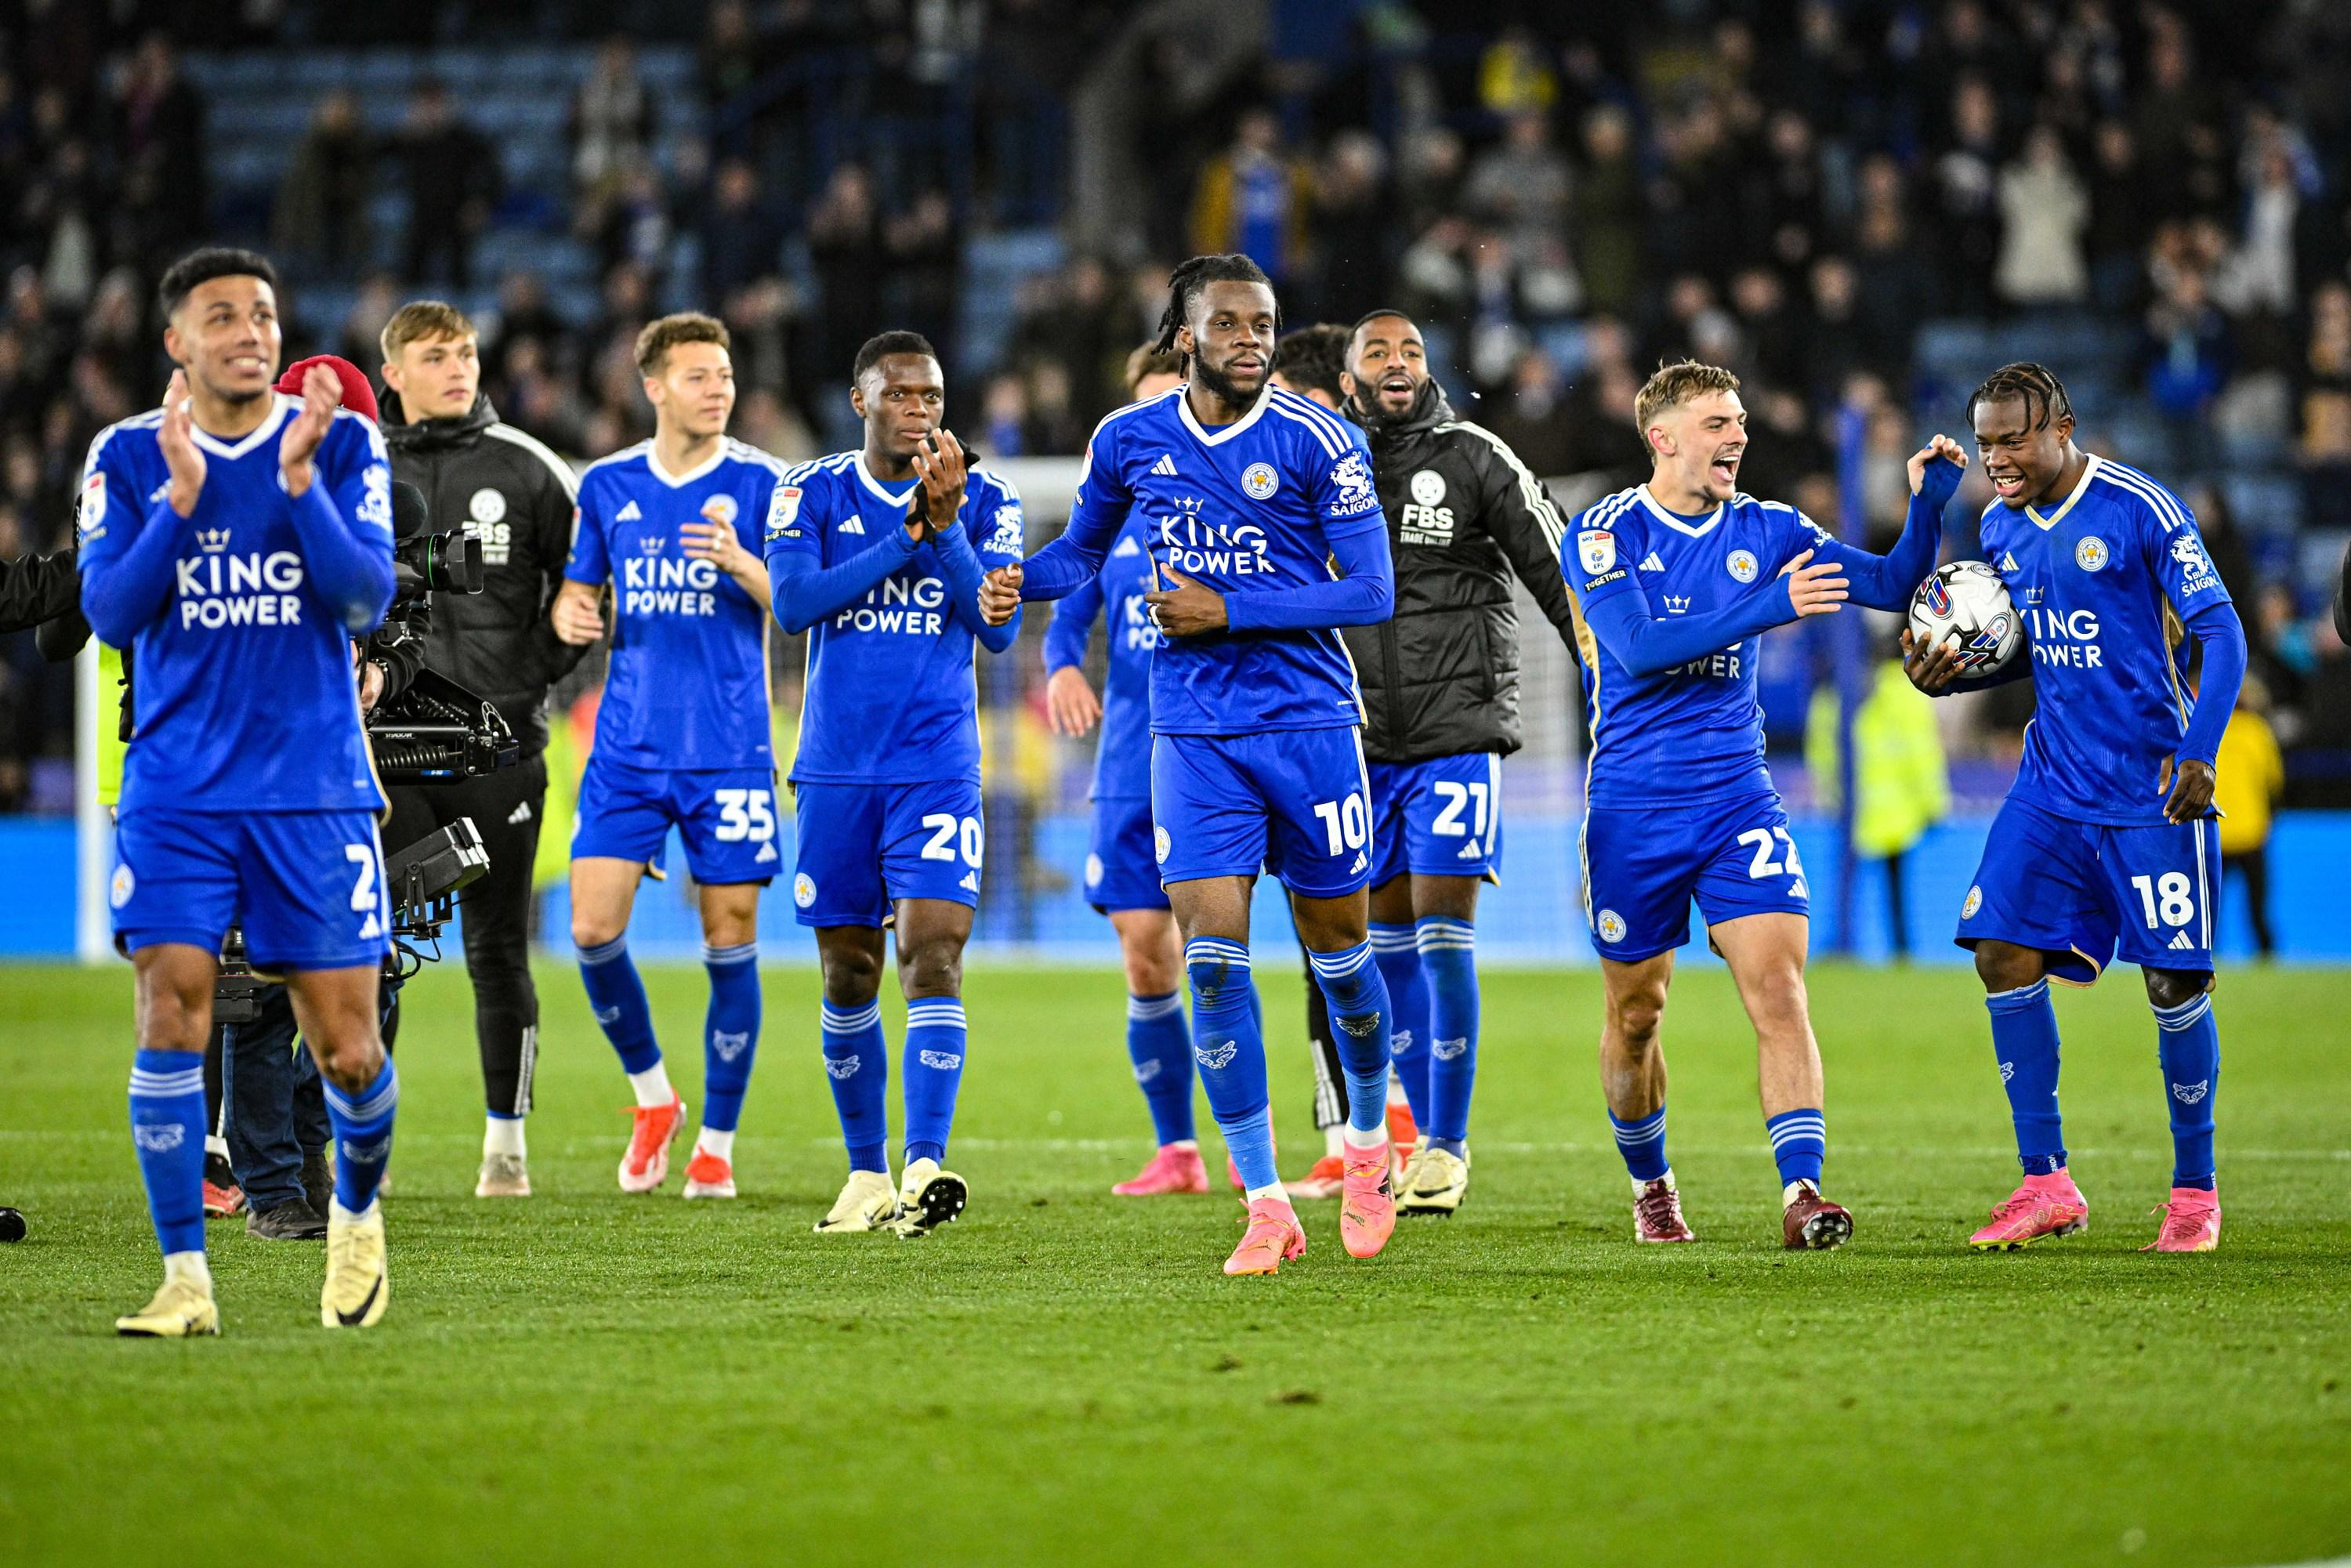 Football: Leicester very close to the Premier League